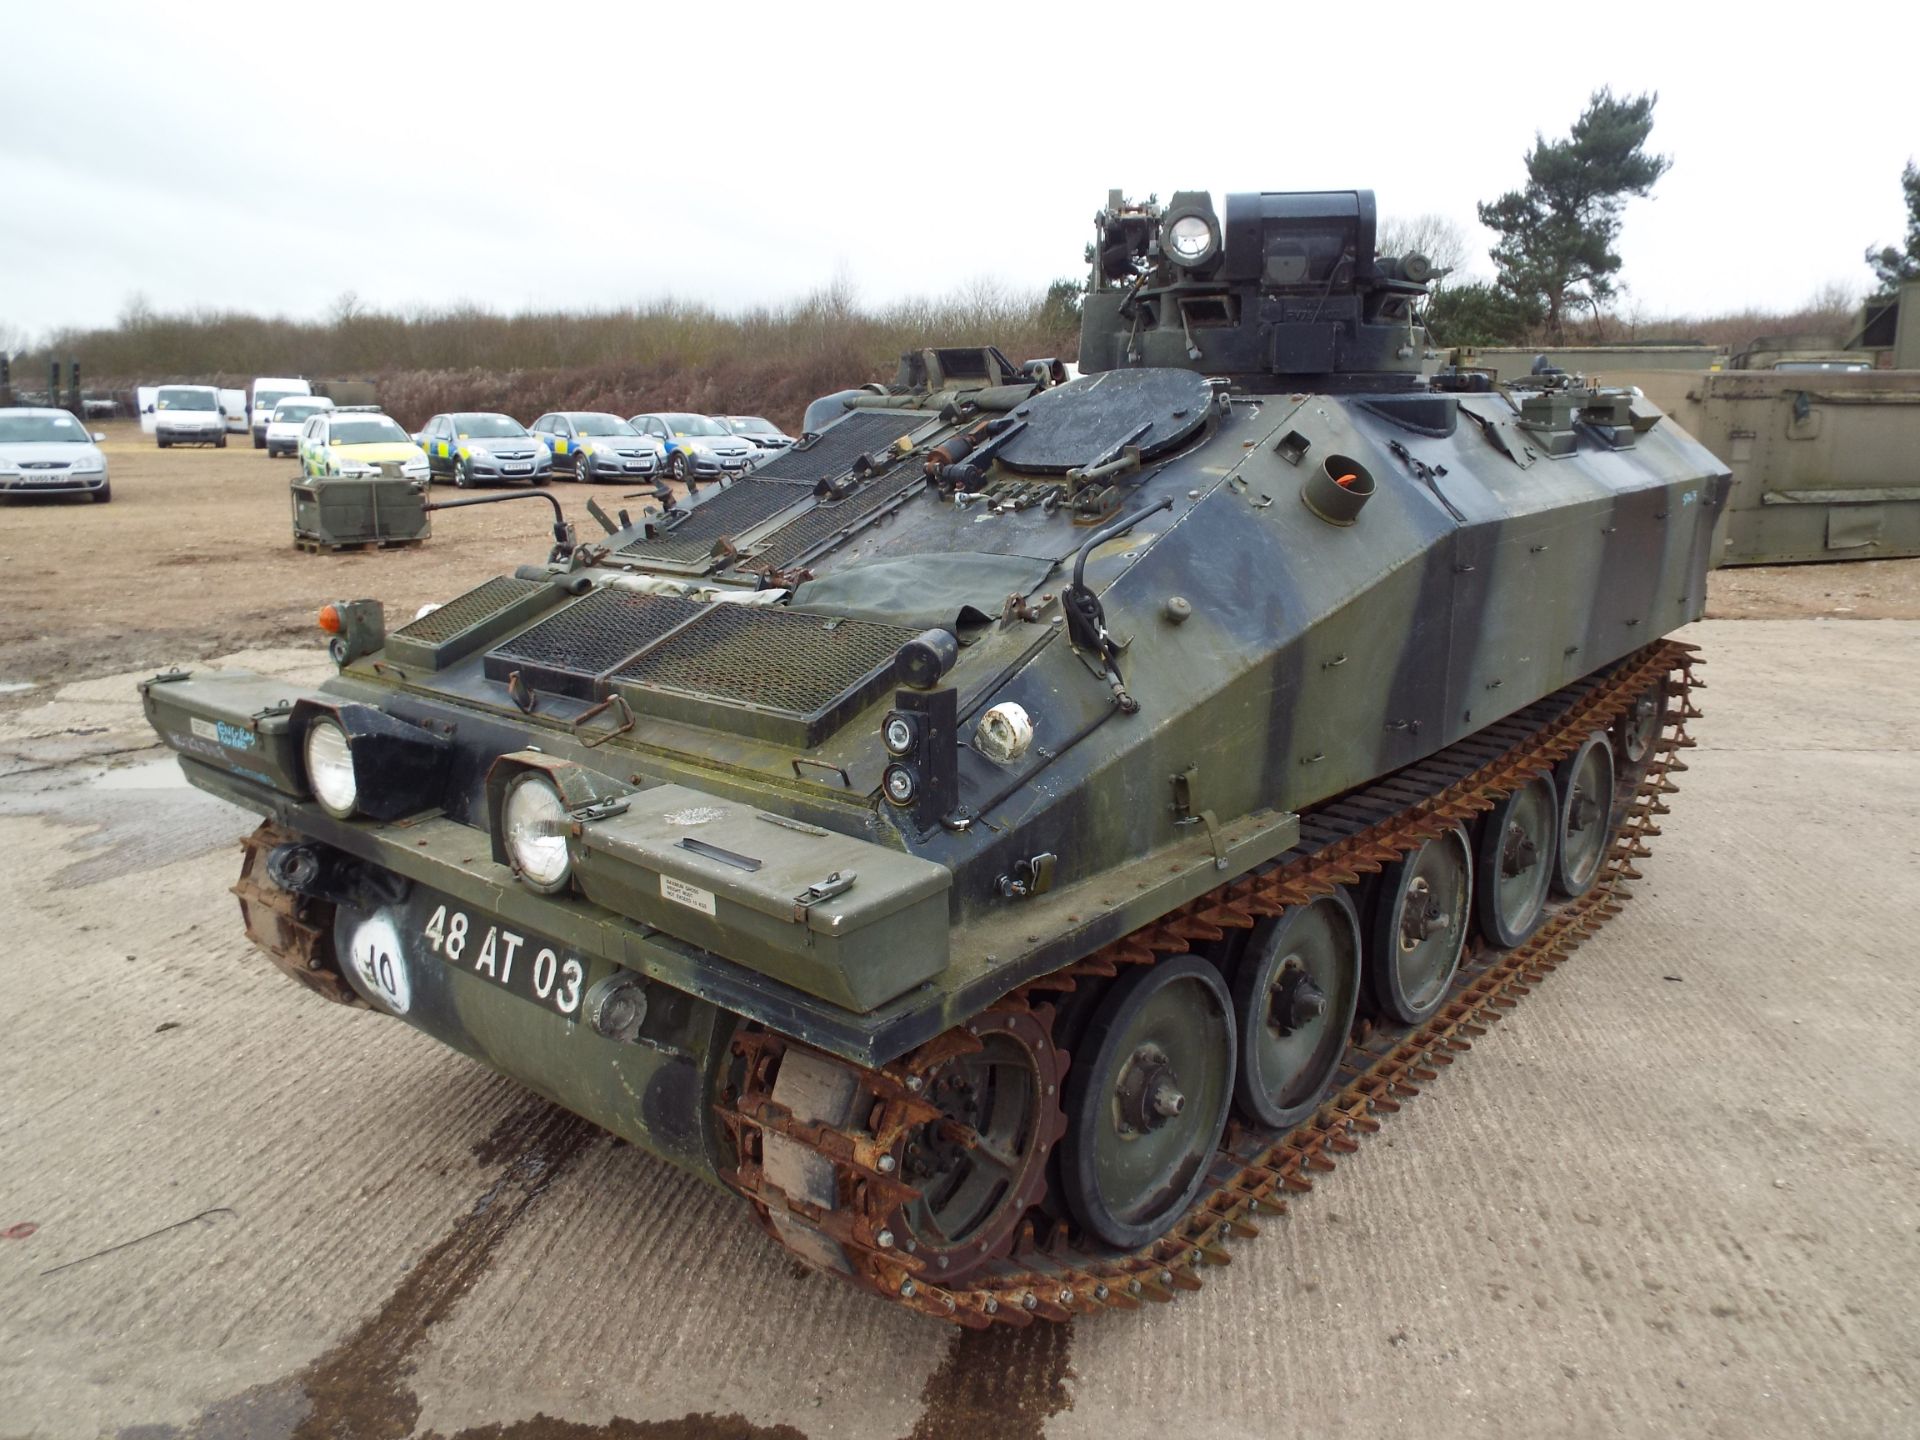 Dieselised CVRT (Combat Vehicle Reconnaissance Tracked) Spartan Armoured Personnel Carrier - Image 3 of 28